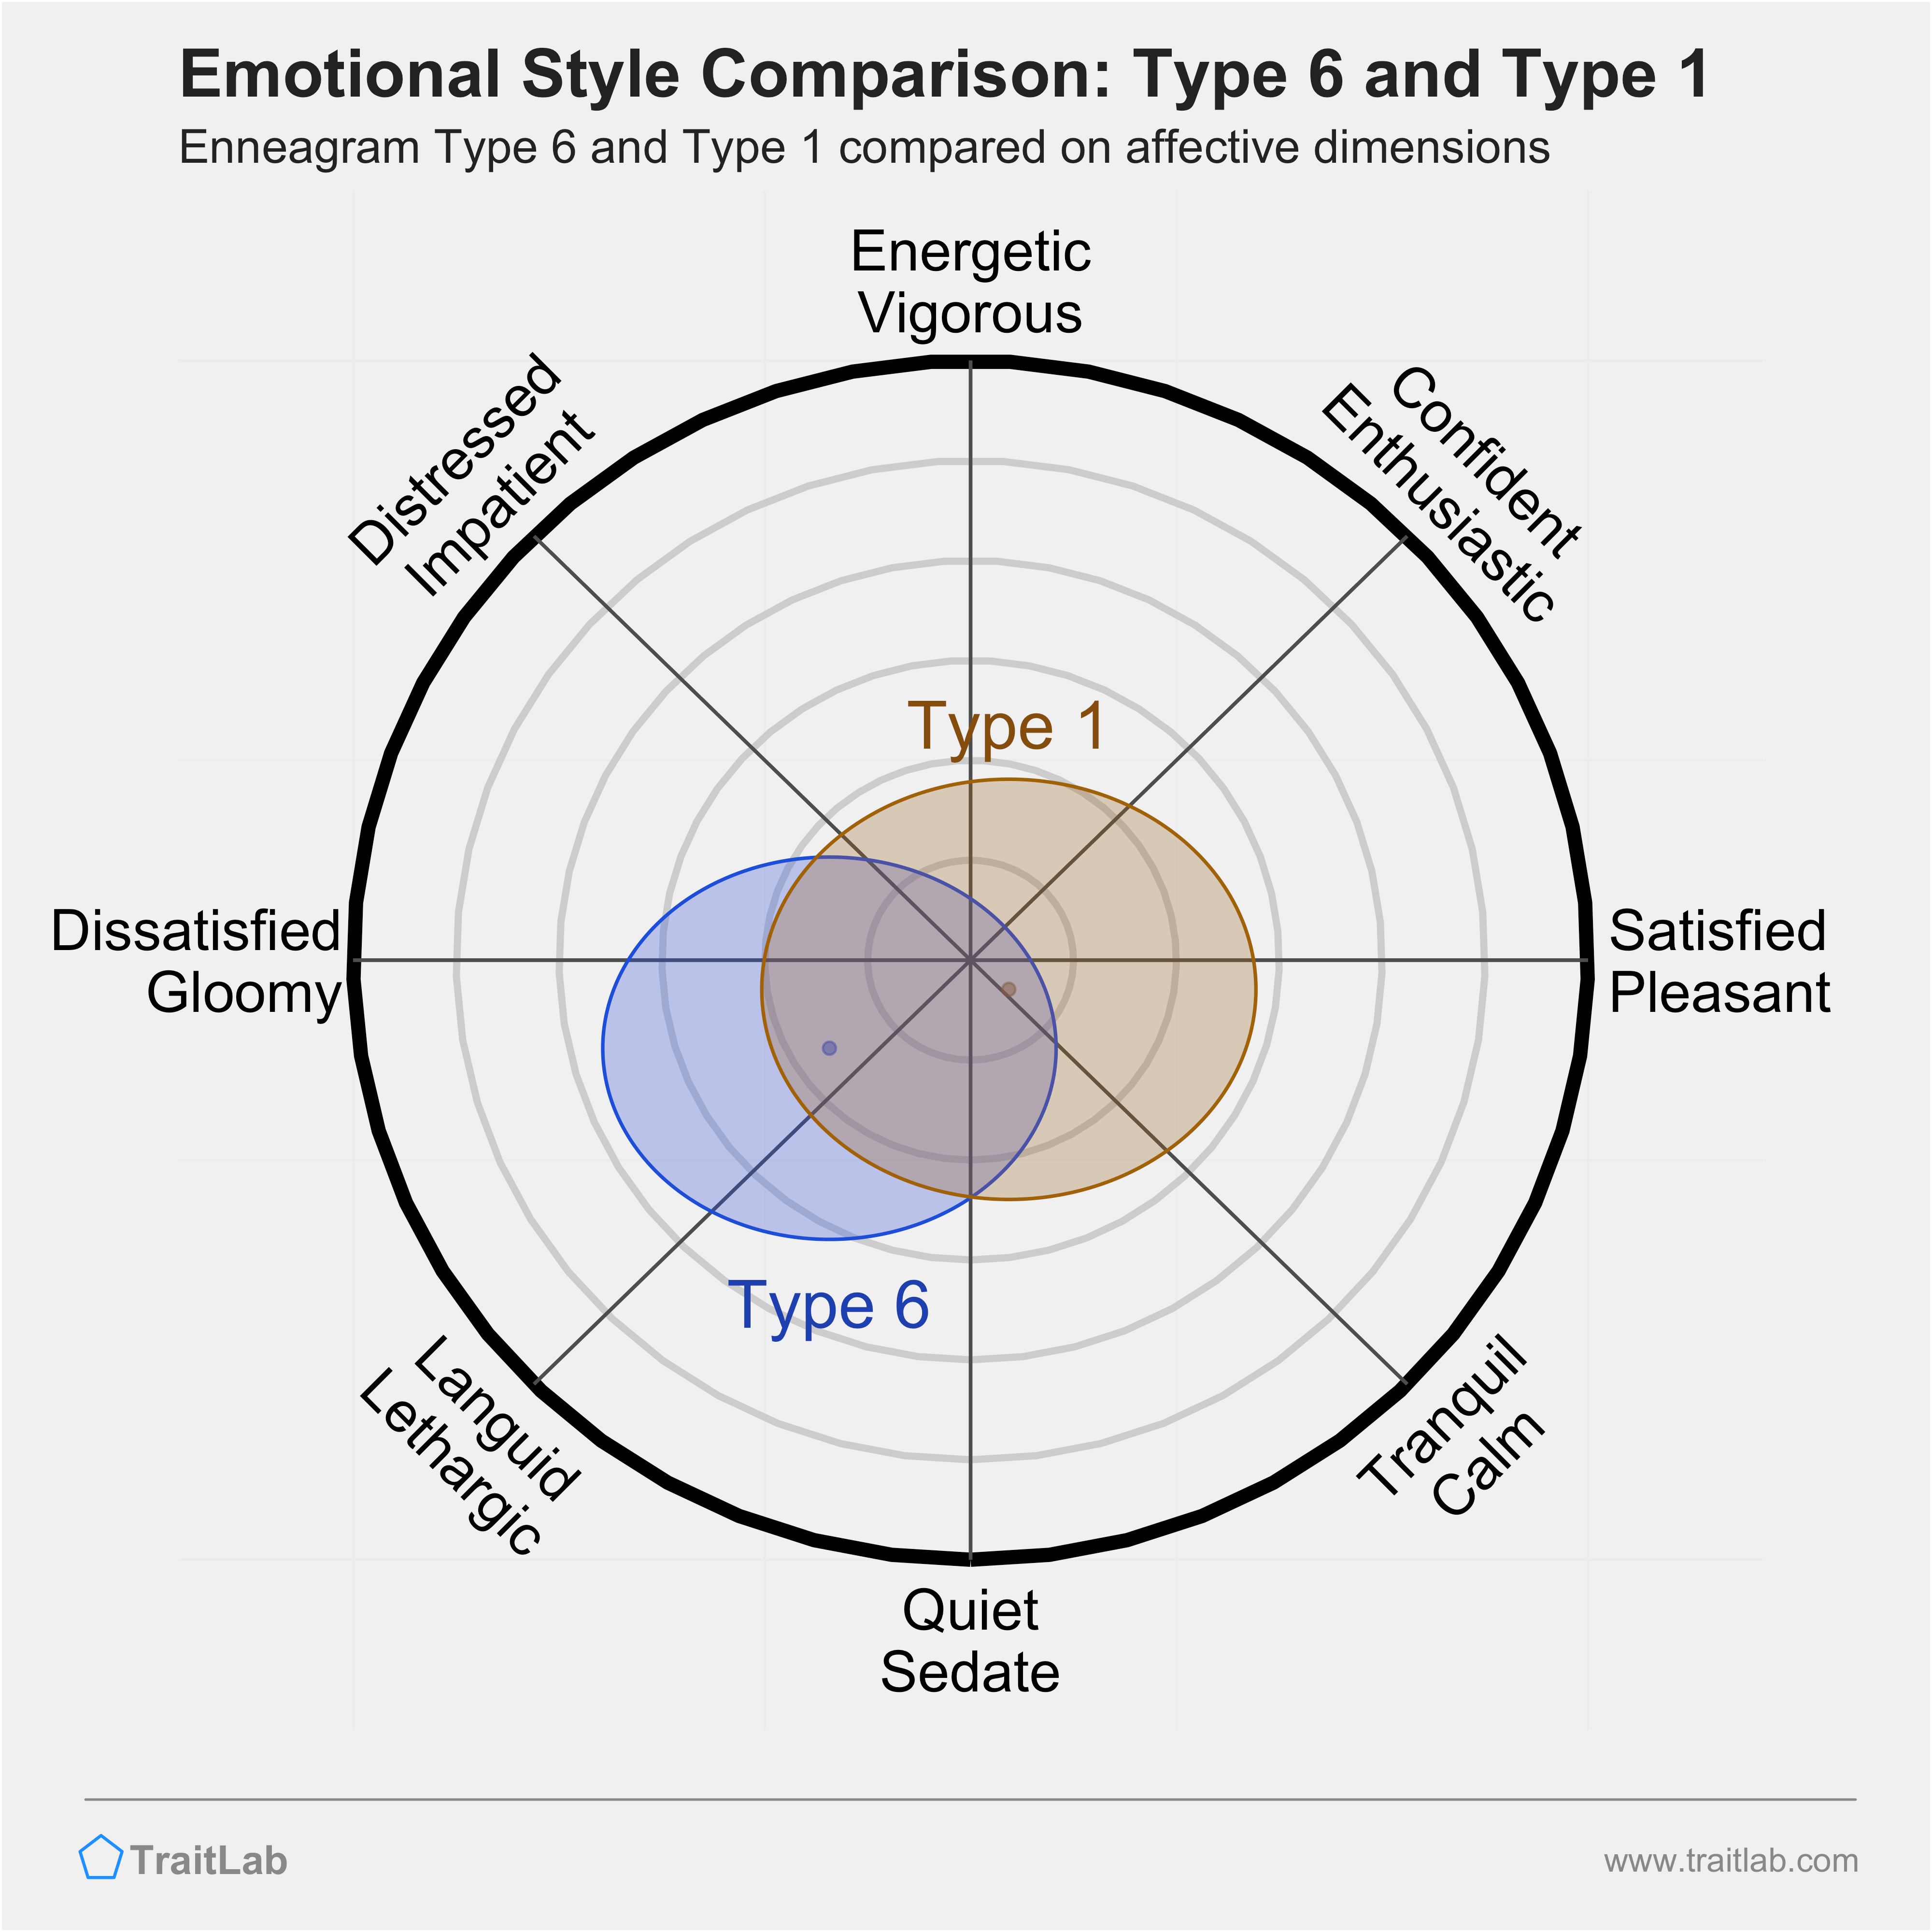 Type 6 and Type 1 comparison across emotional (affective) dimensions